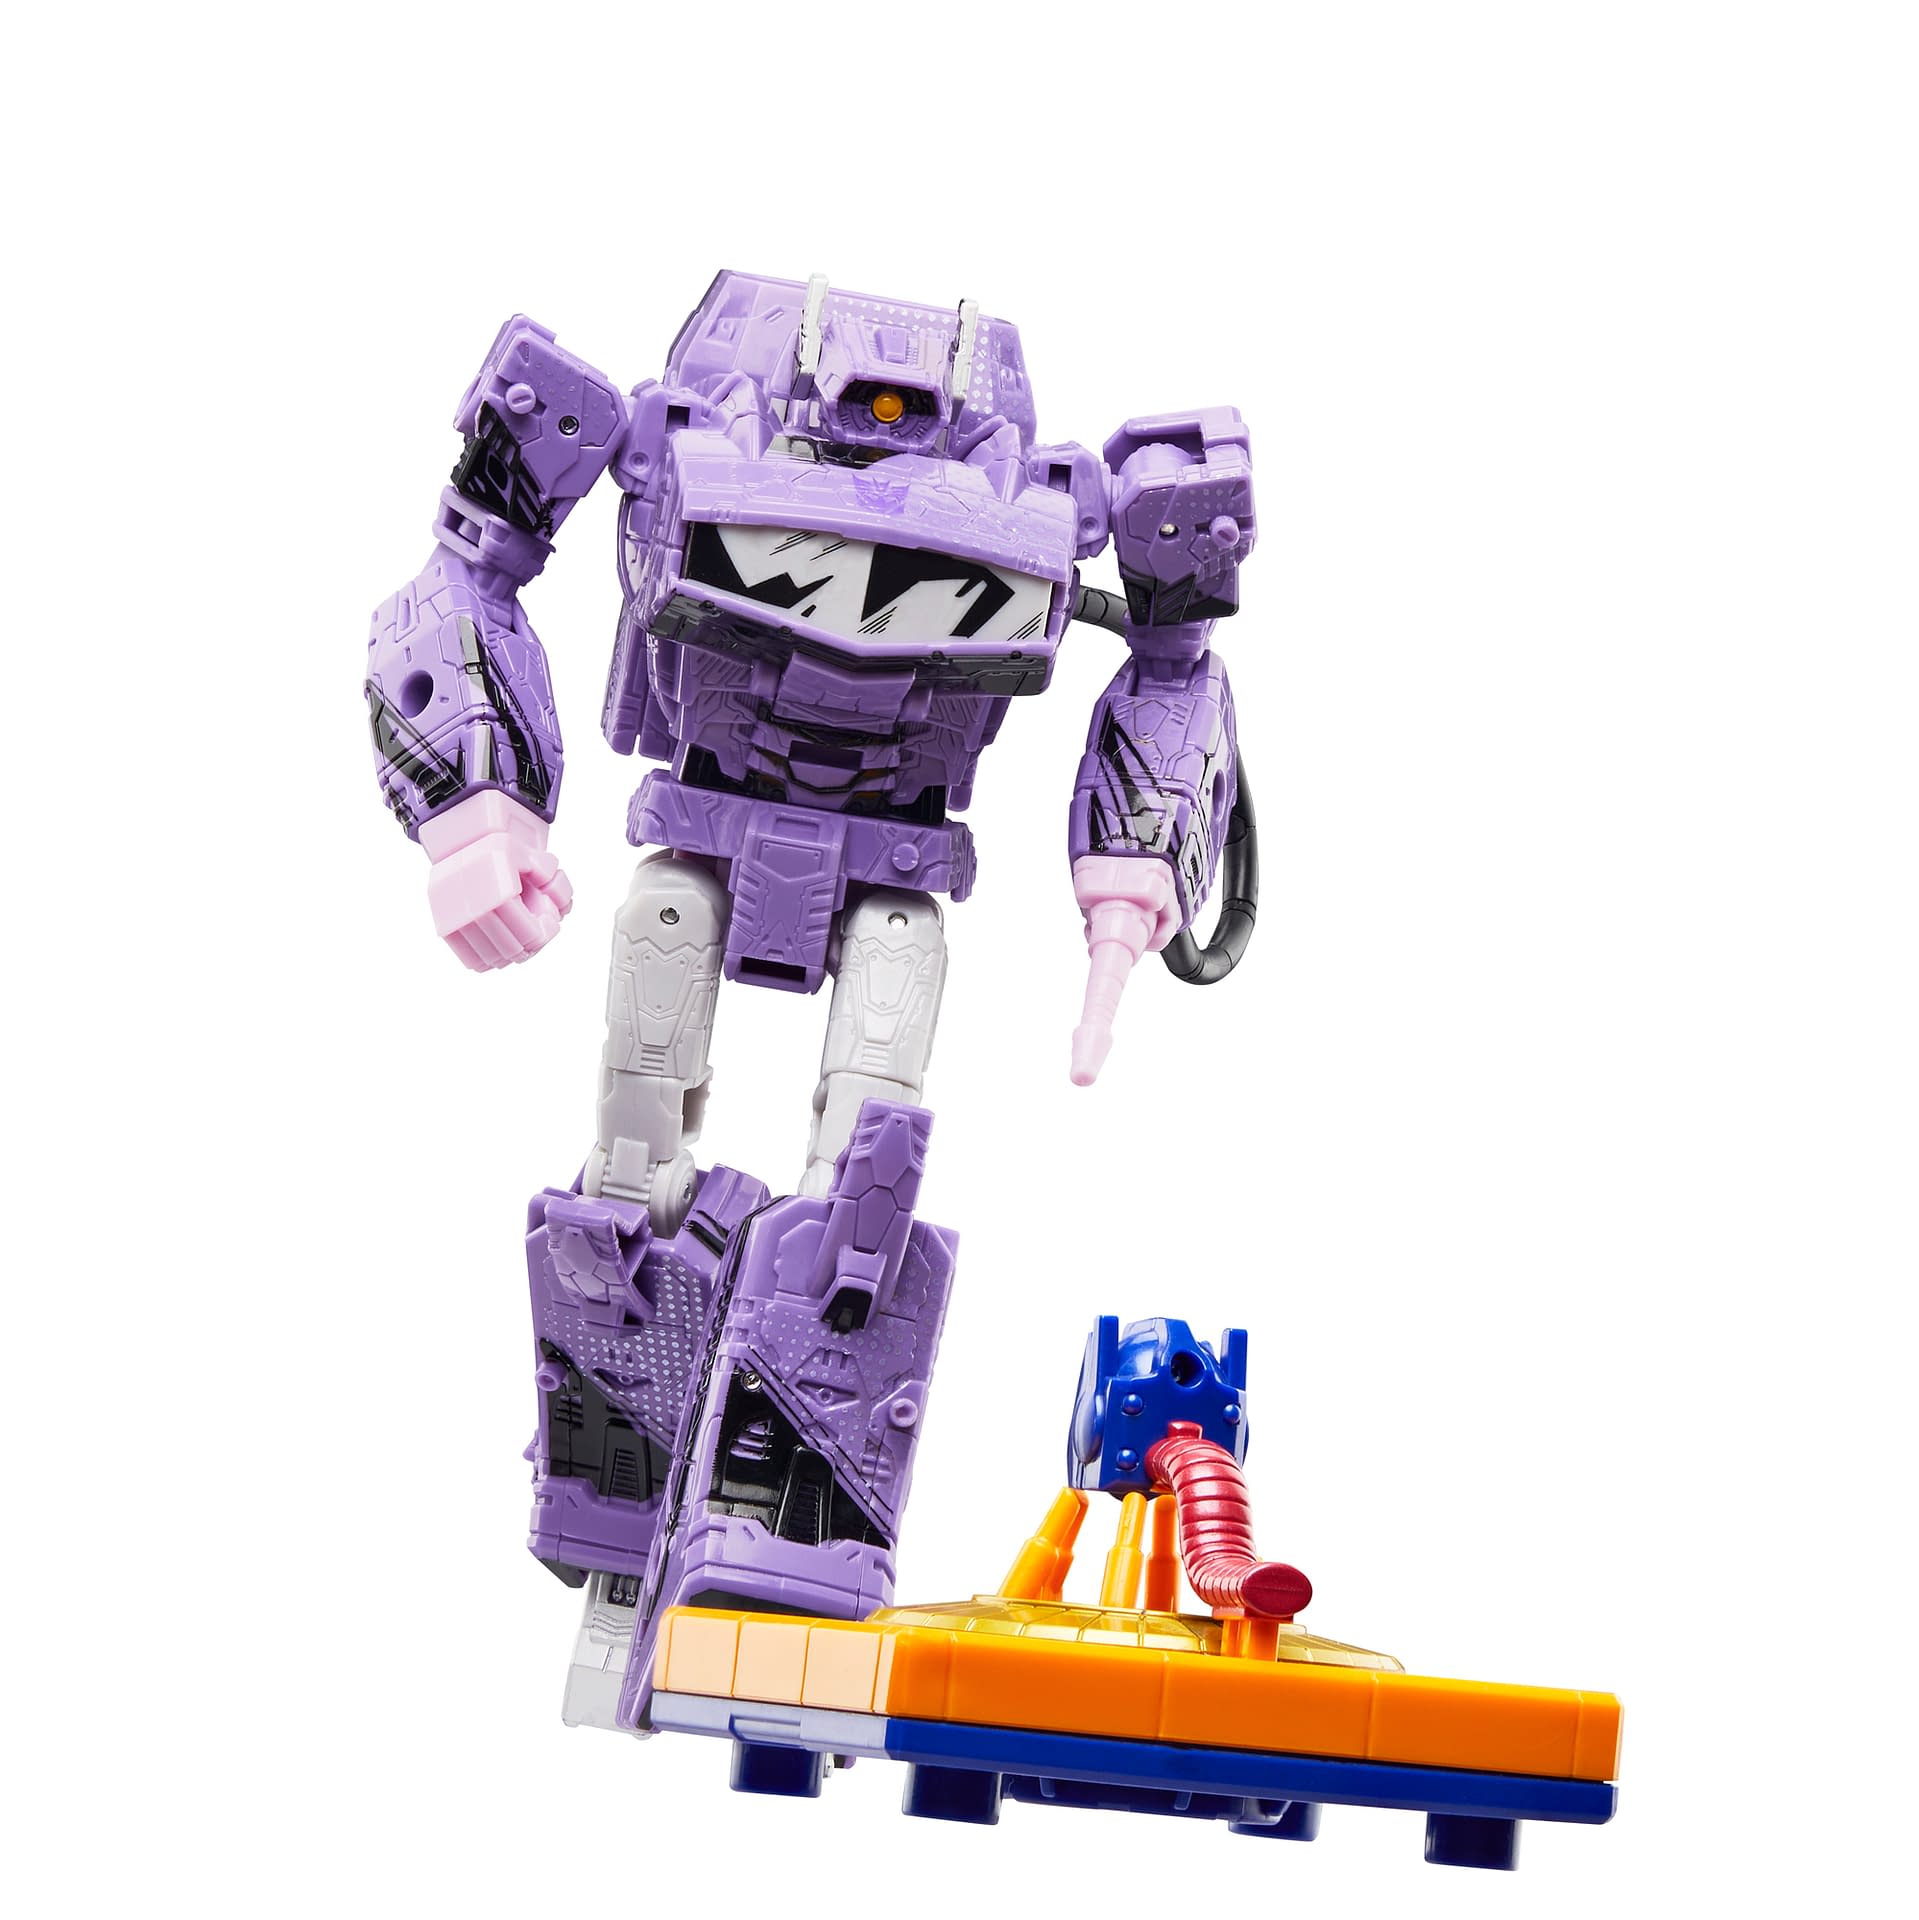 Transformers Comic Edition Shockwave Coming Soon from Hasbro 